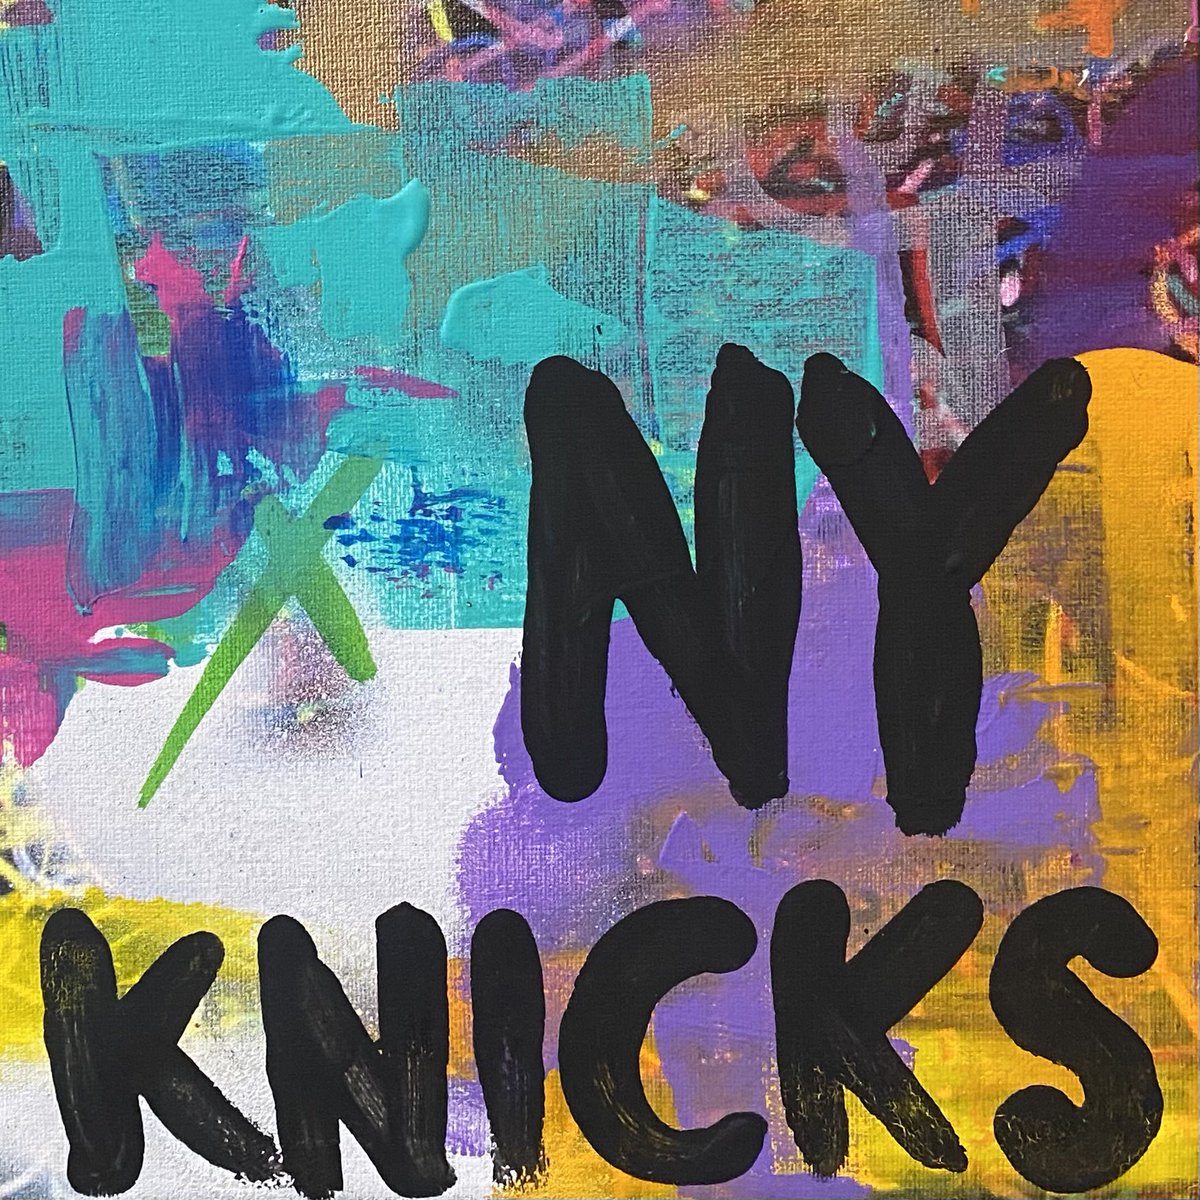 #Knicks won game 5 so heres progress on my #NewYorkKnicks painting thedngr.com 4 art photography tshirts buttons magnets mirrors + ebay collectibles @ ebay.com/usr/thedngr #NBAPlayoffs   #NYKnicks #KnicksNation #KnicksVsPacers #abstractart #popart #nyc #newyorkcity